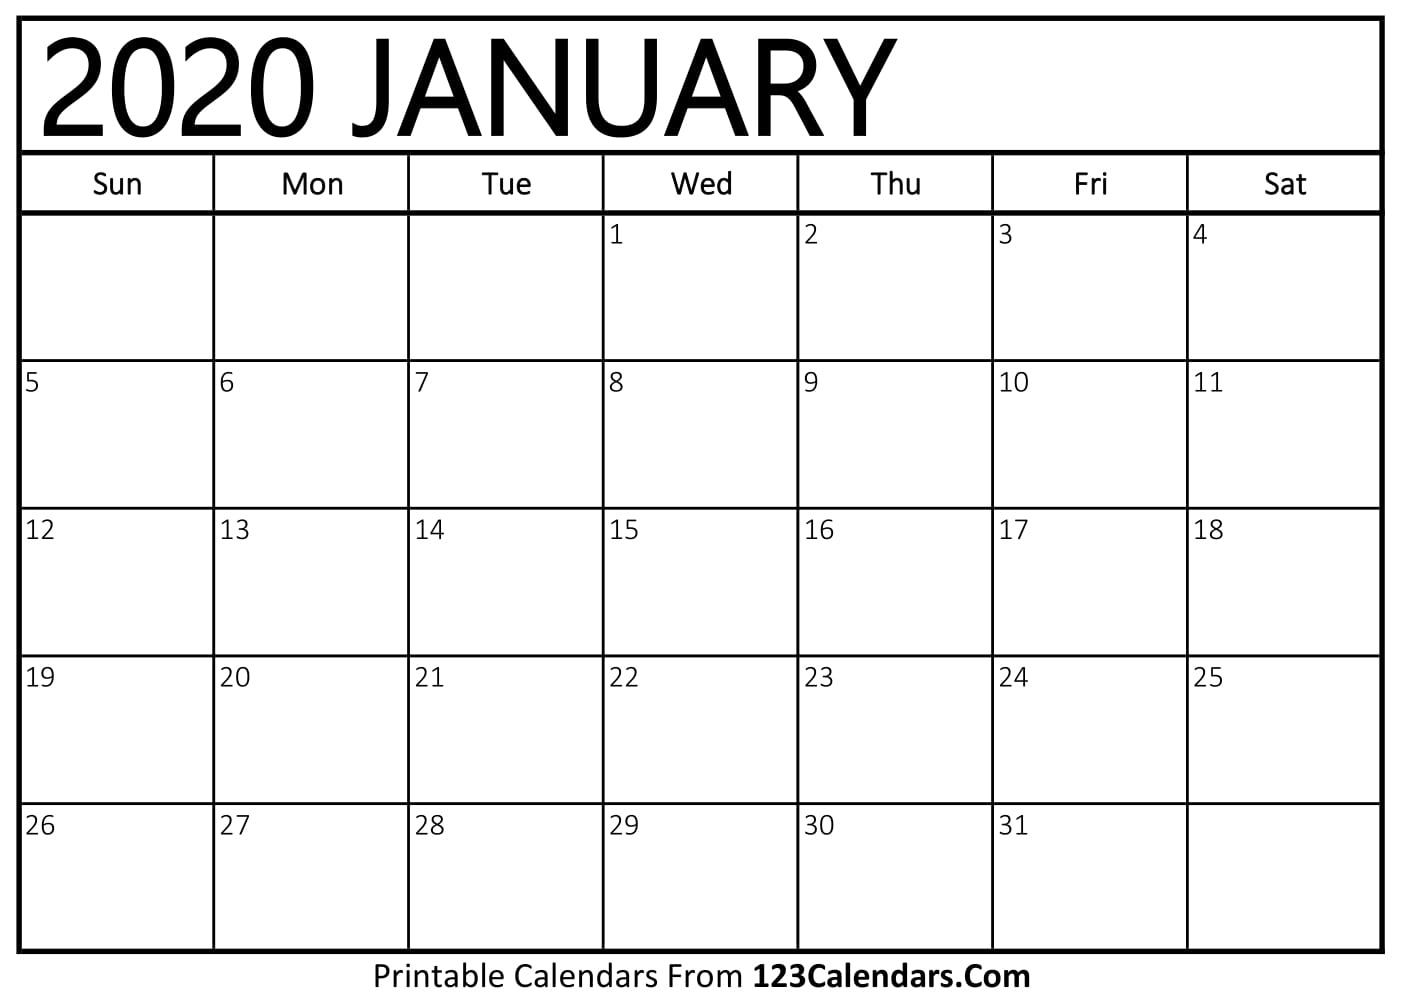 Free Printable Calendar | 123Calendars Exceptional Monthly Calendar You Can Type On And Print